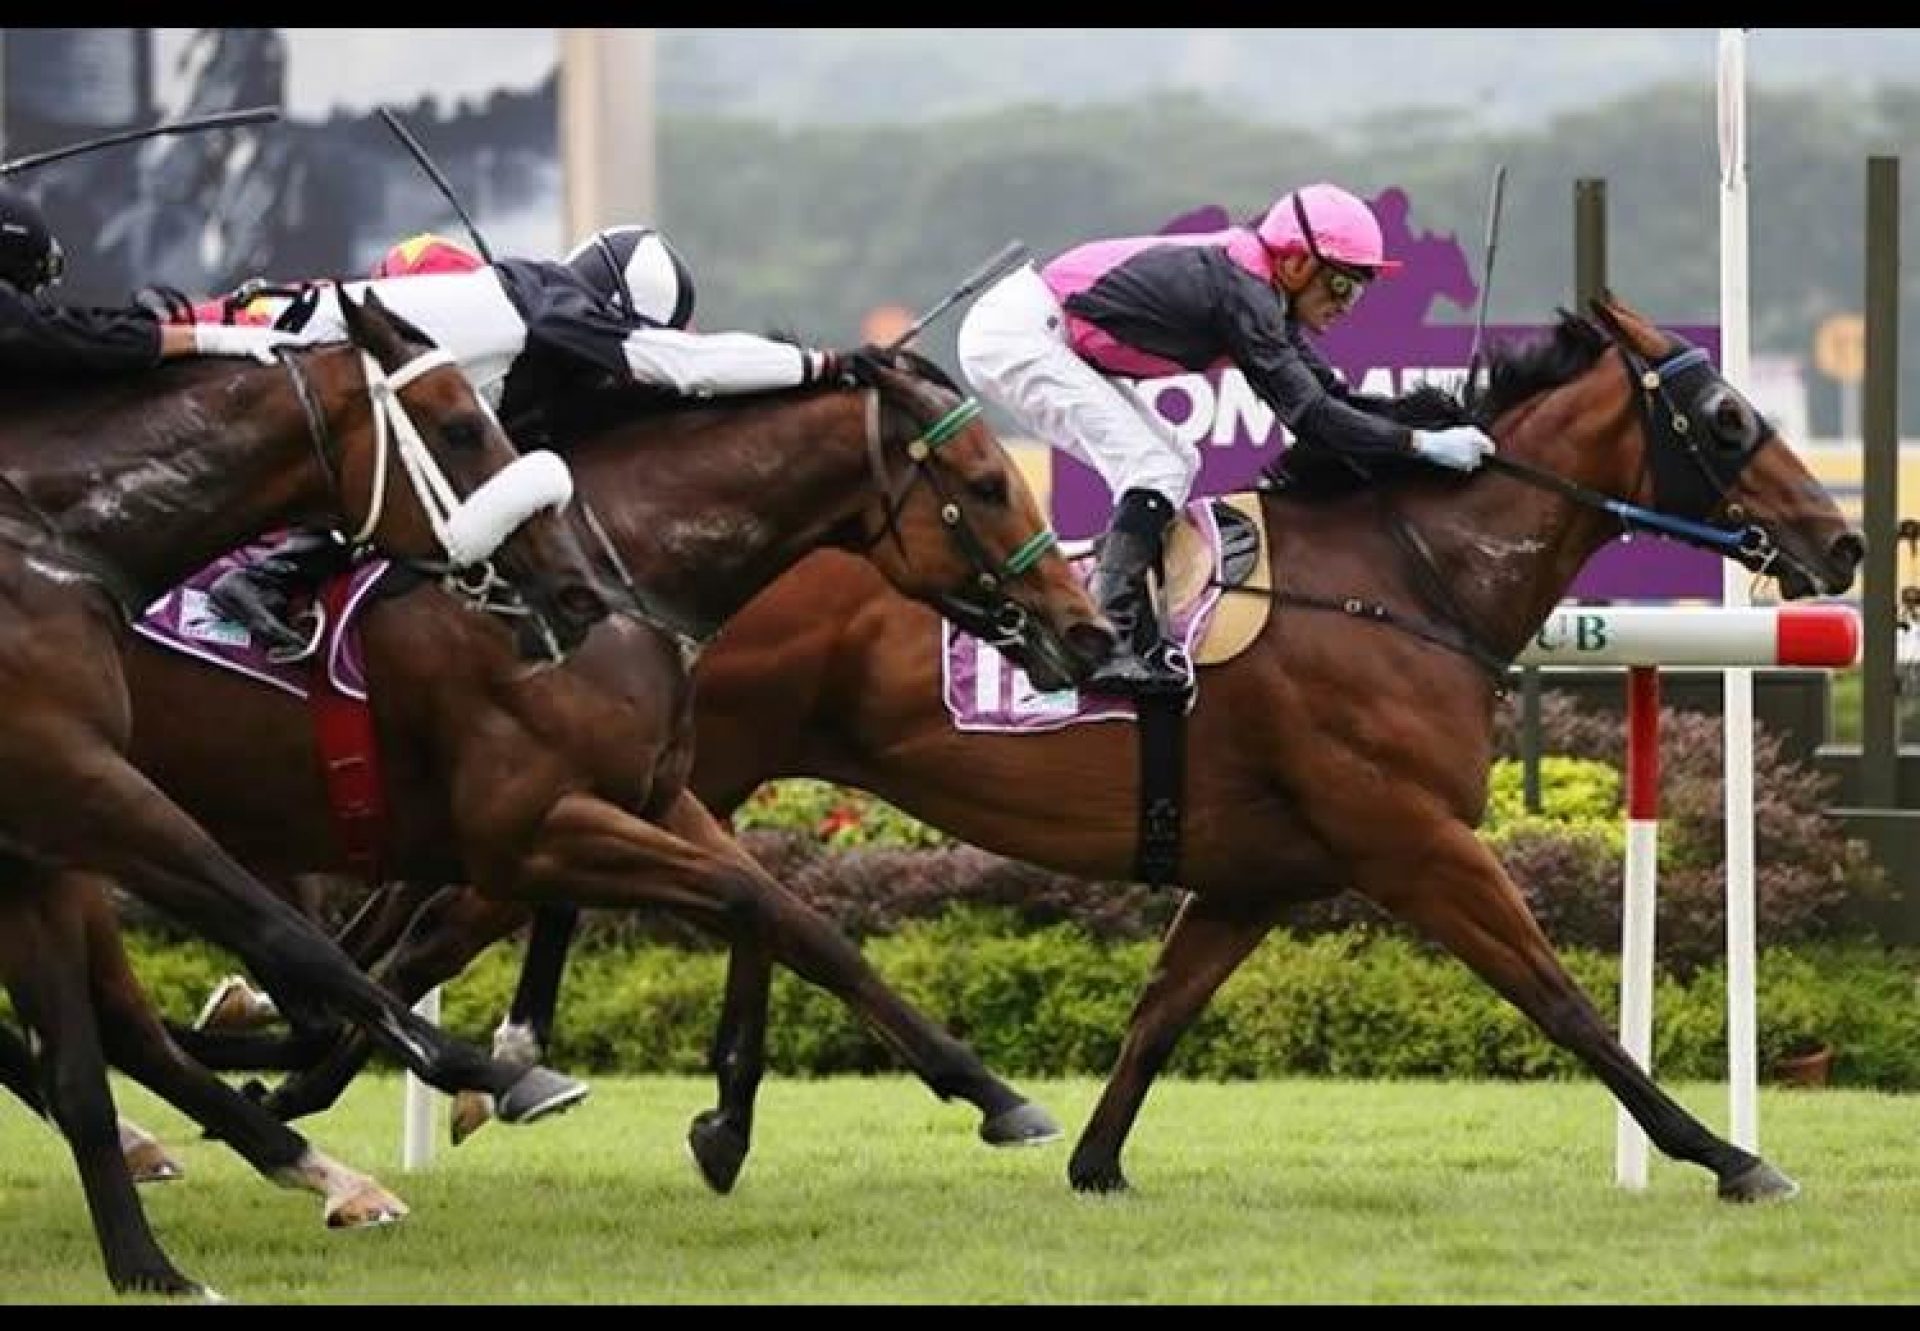 Emperor Max (Holy Roman Emperor) winning the Sng G3 Garden City Trophy in Singapore